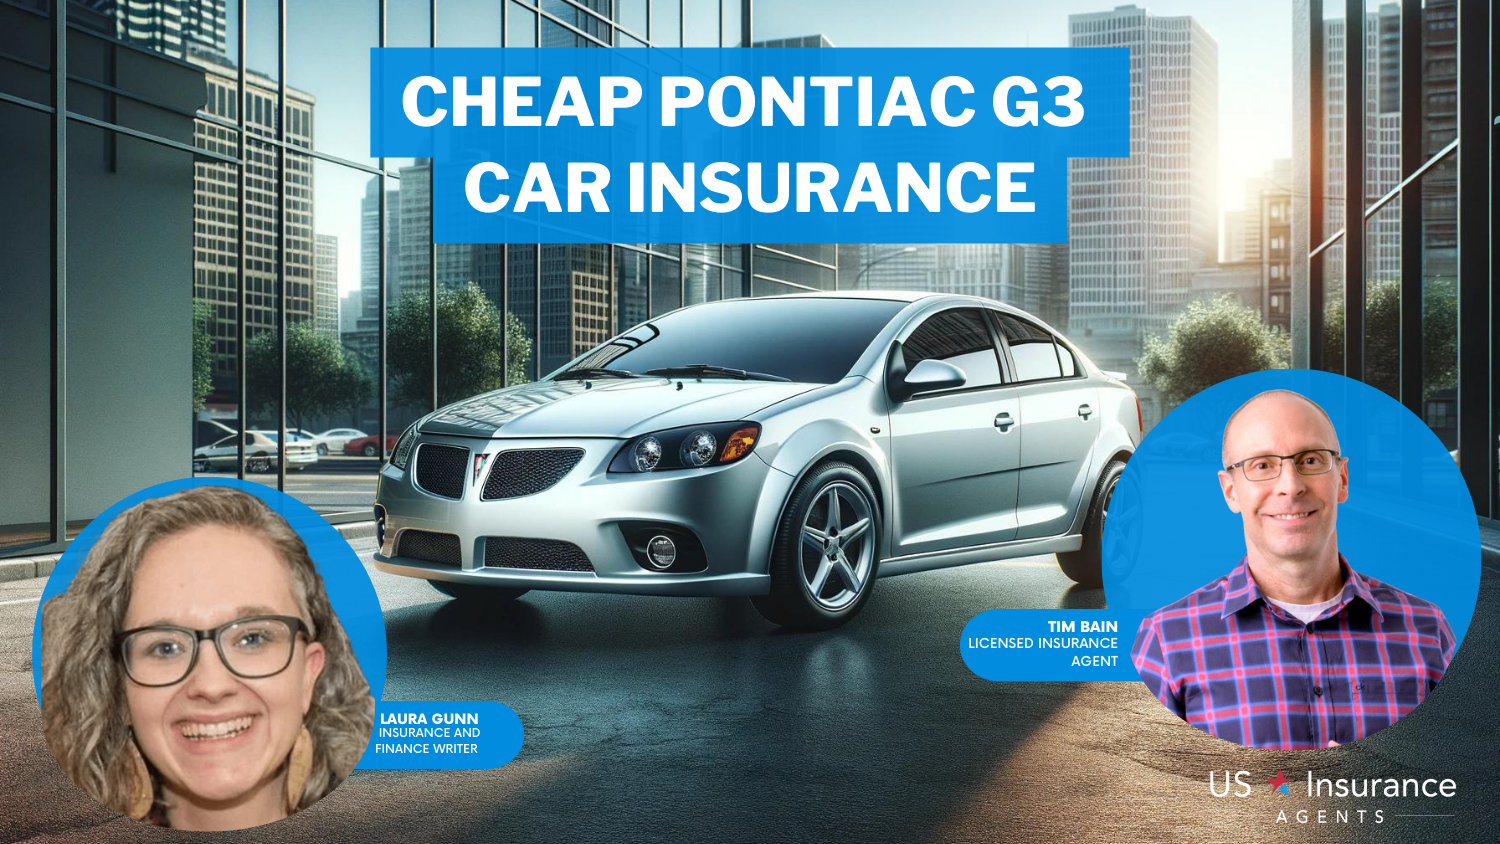 Cheap Pontiac G3 Car Insurance: Auto-Owners, USAA, and State Farm